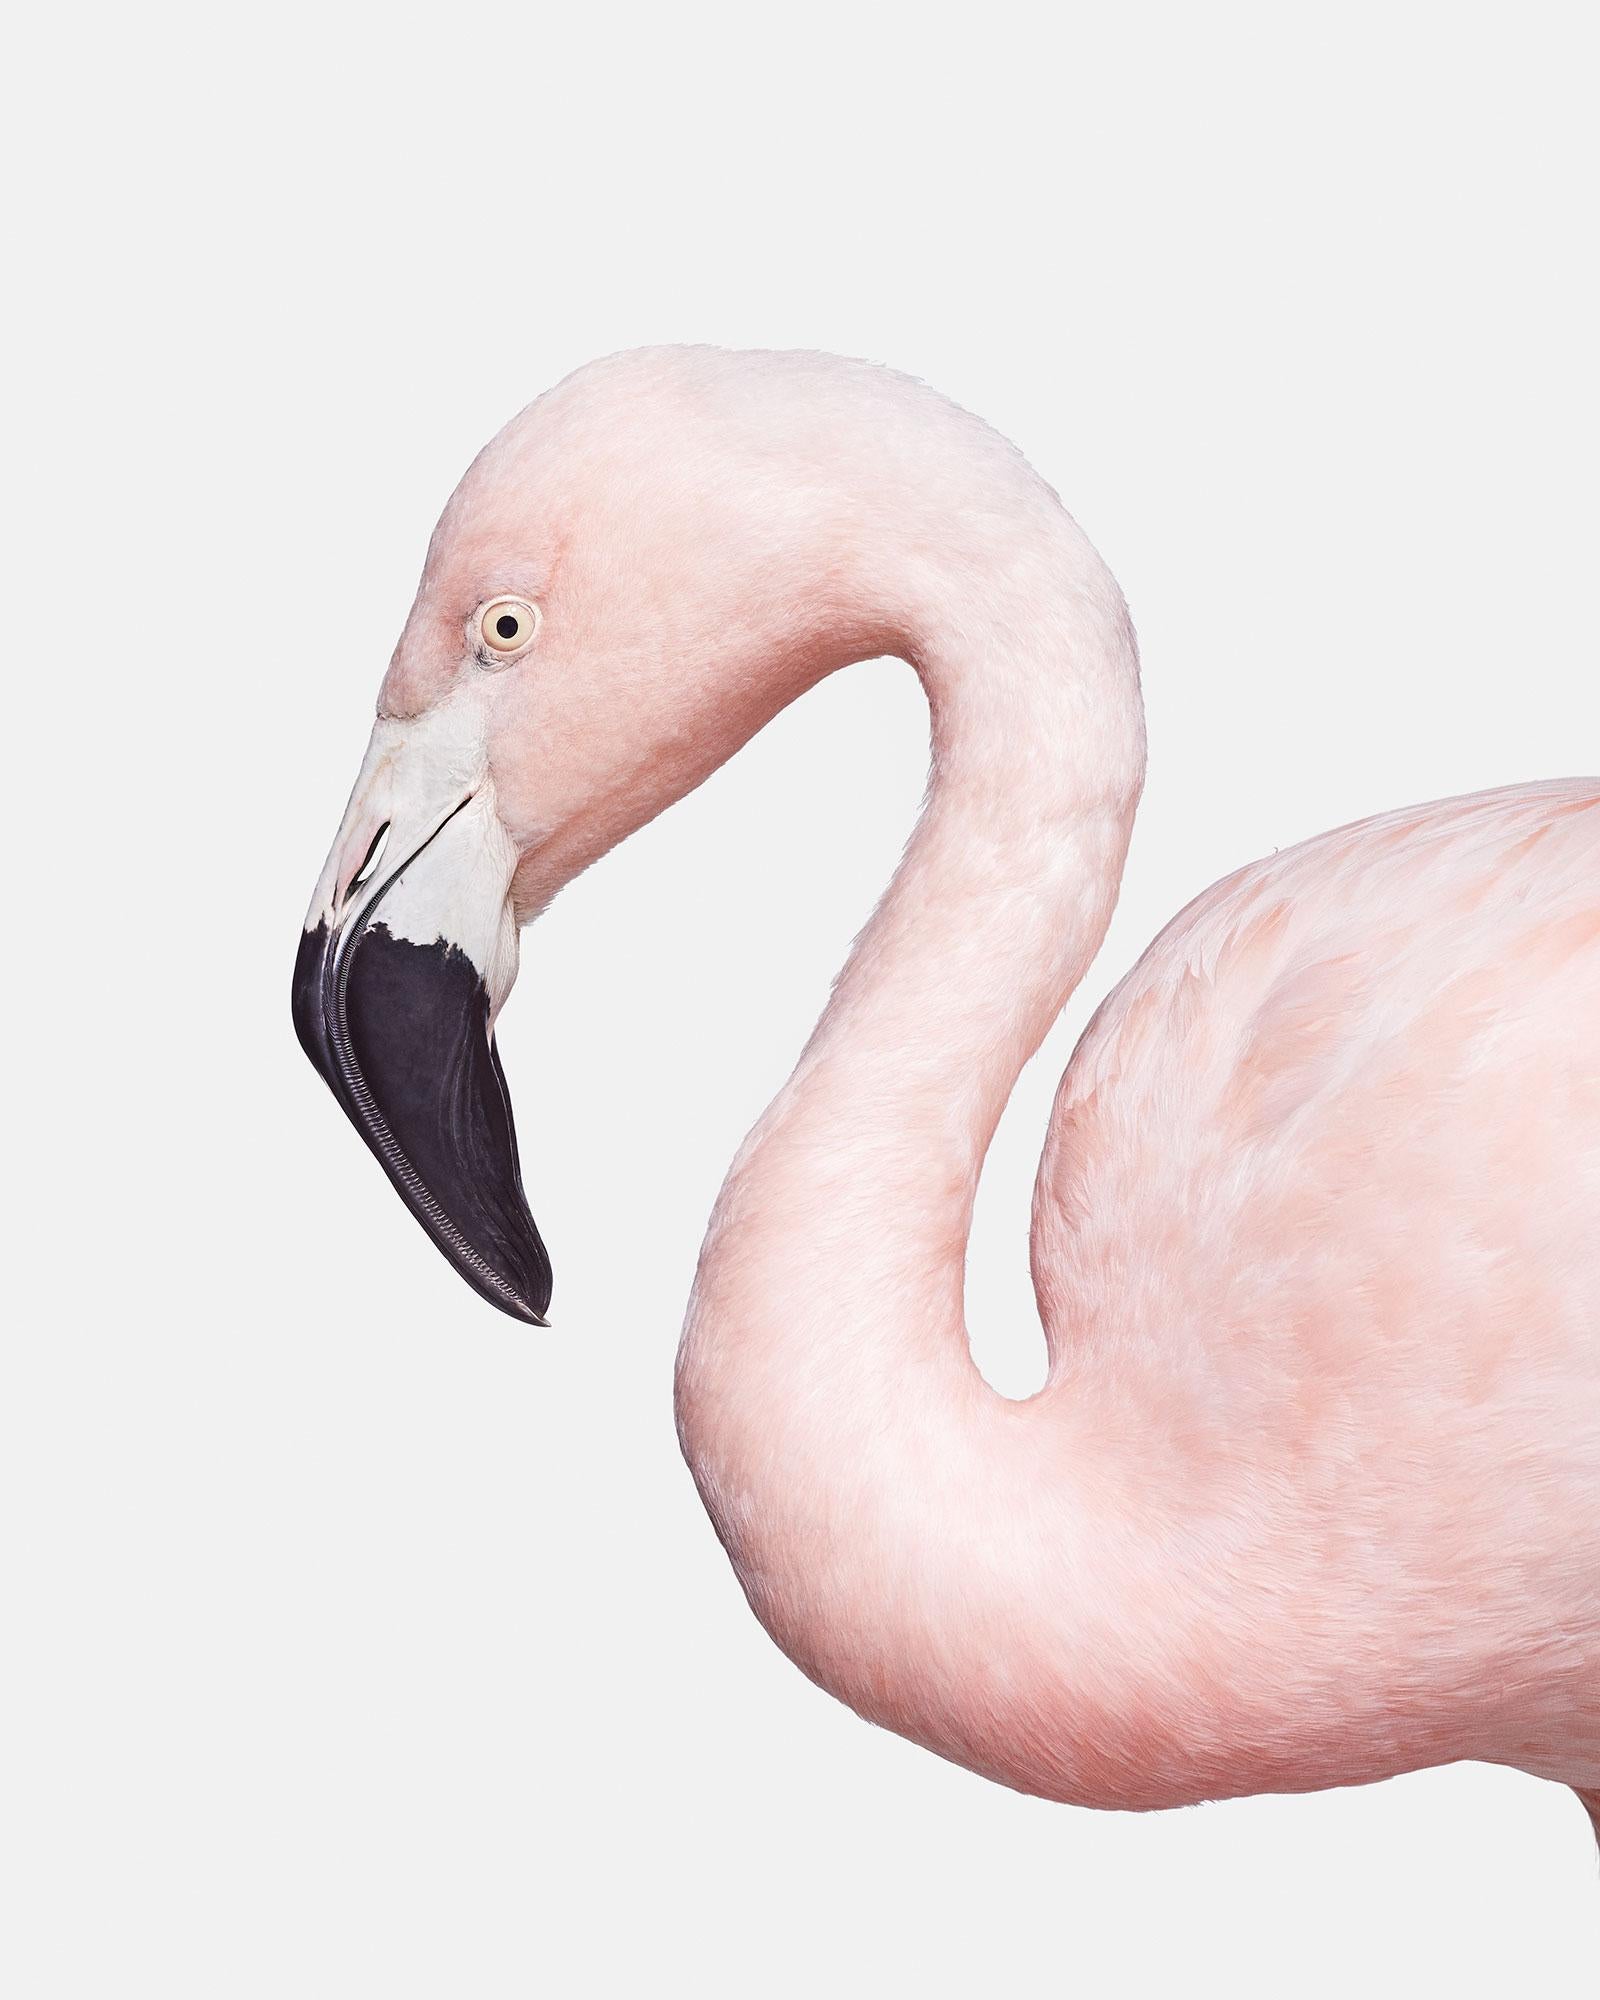 Randal Ford - Flamingo No. 1, Photography 2018, Printed After